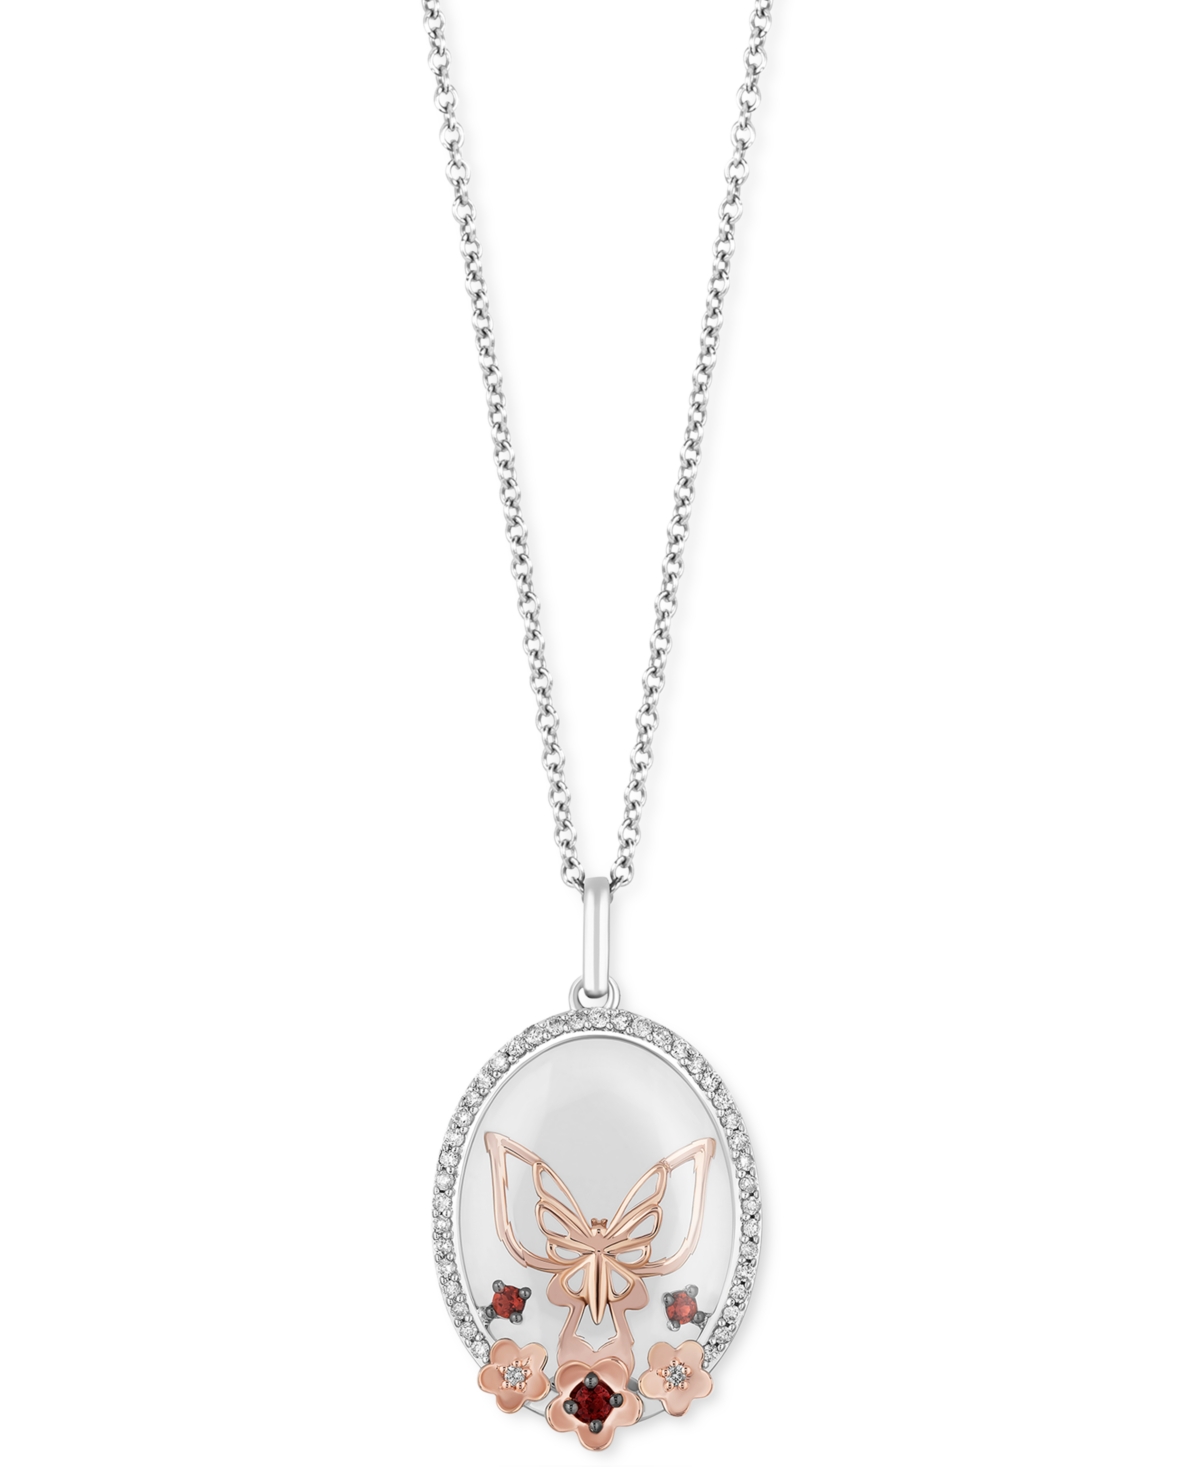 Enchanted Disney Fine Jewelry White Topaz (4-3/8 ct. t.w.), Garnet Accent & Diamond (1/6 ct. t.w.) Mulan Butterfly Pendant Necklace in Sterling Silver & 14k Rose Gold, 16" + 2" extender